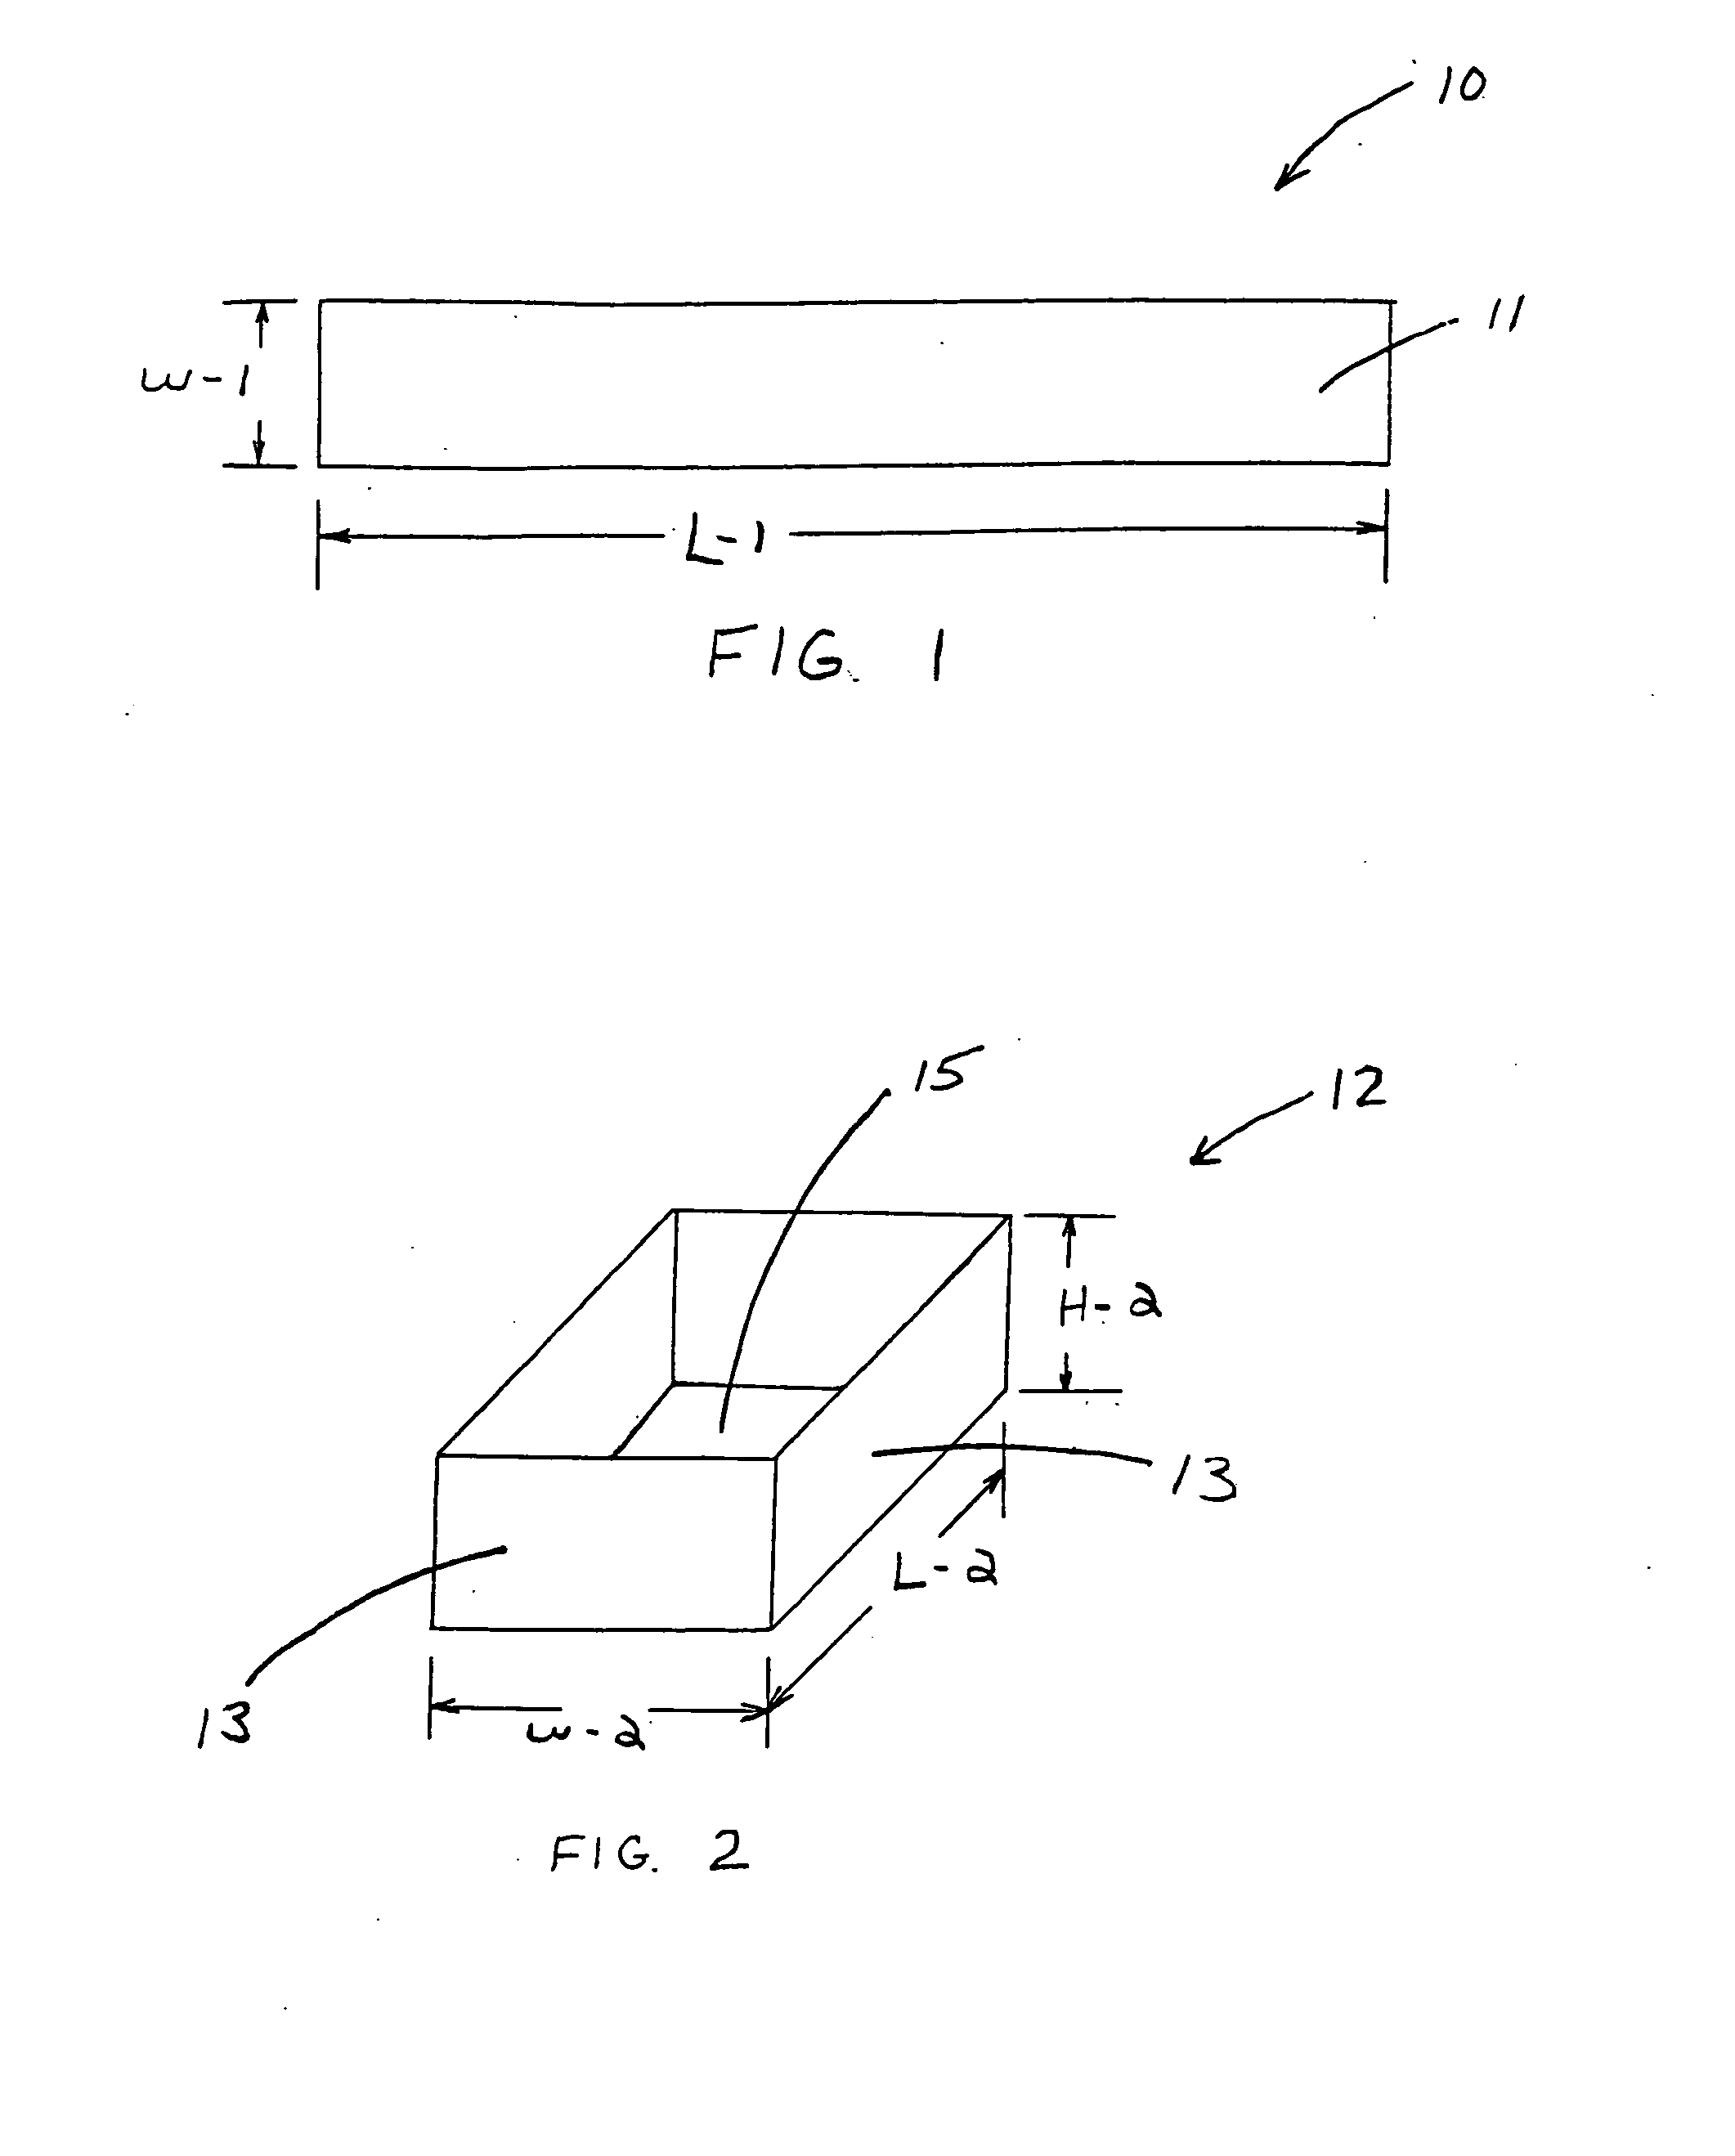 Methods and structures for the production of electrically treated items and electrical connections